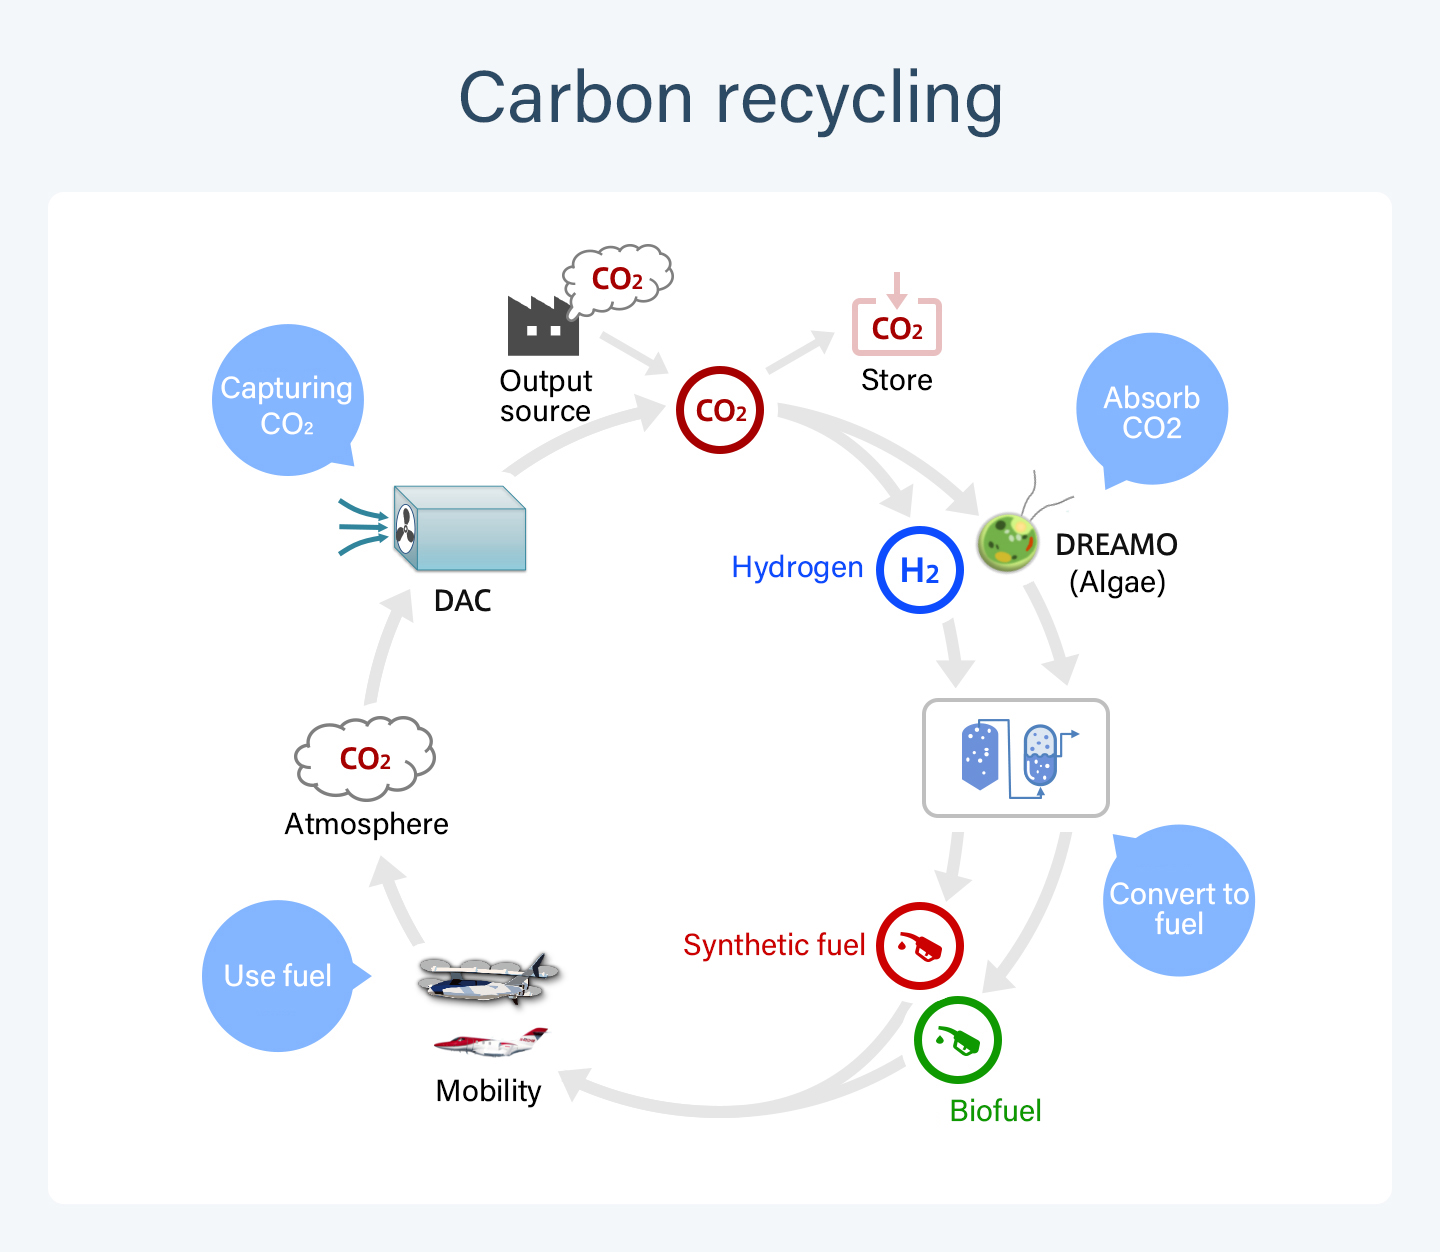 Carbon recycling